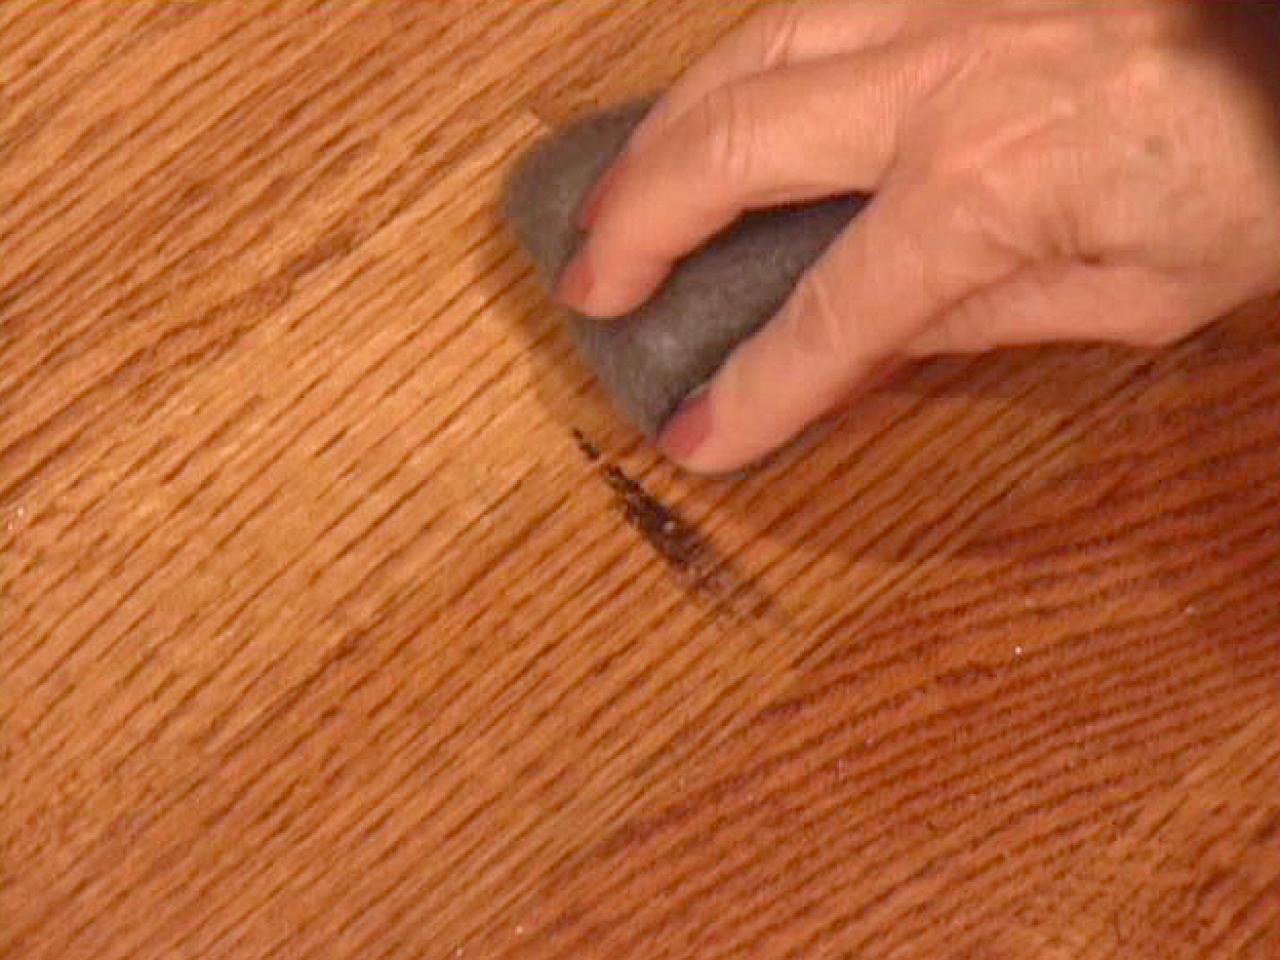 How To Touch Up Wood Floors Tos Diy, How To Get Wax Off Hardwood Floors